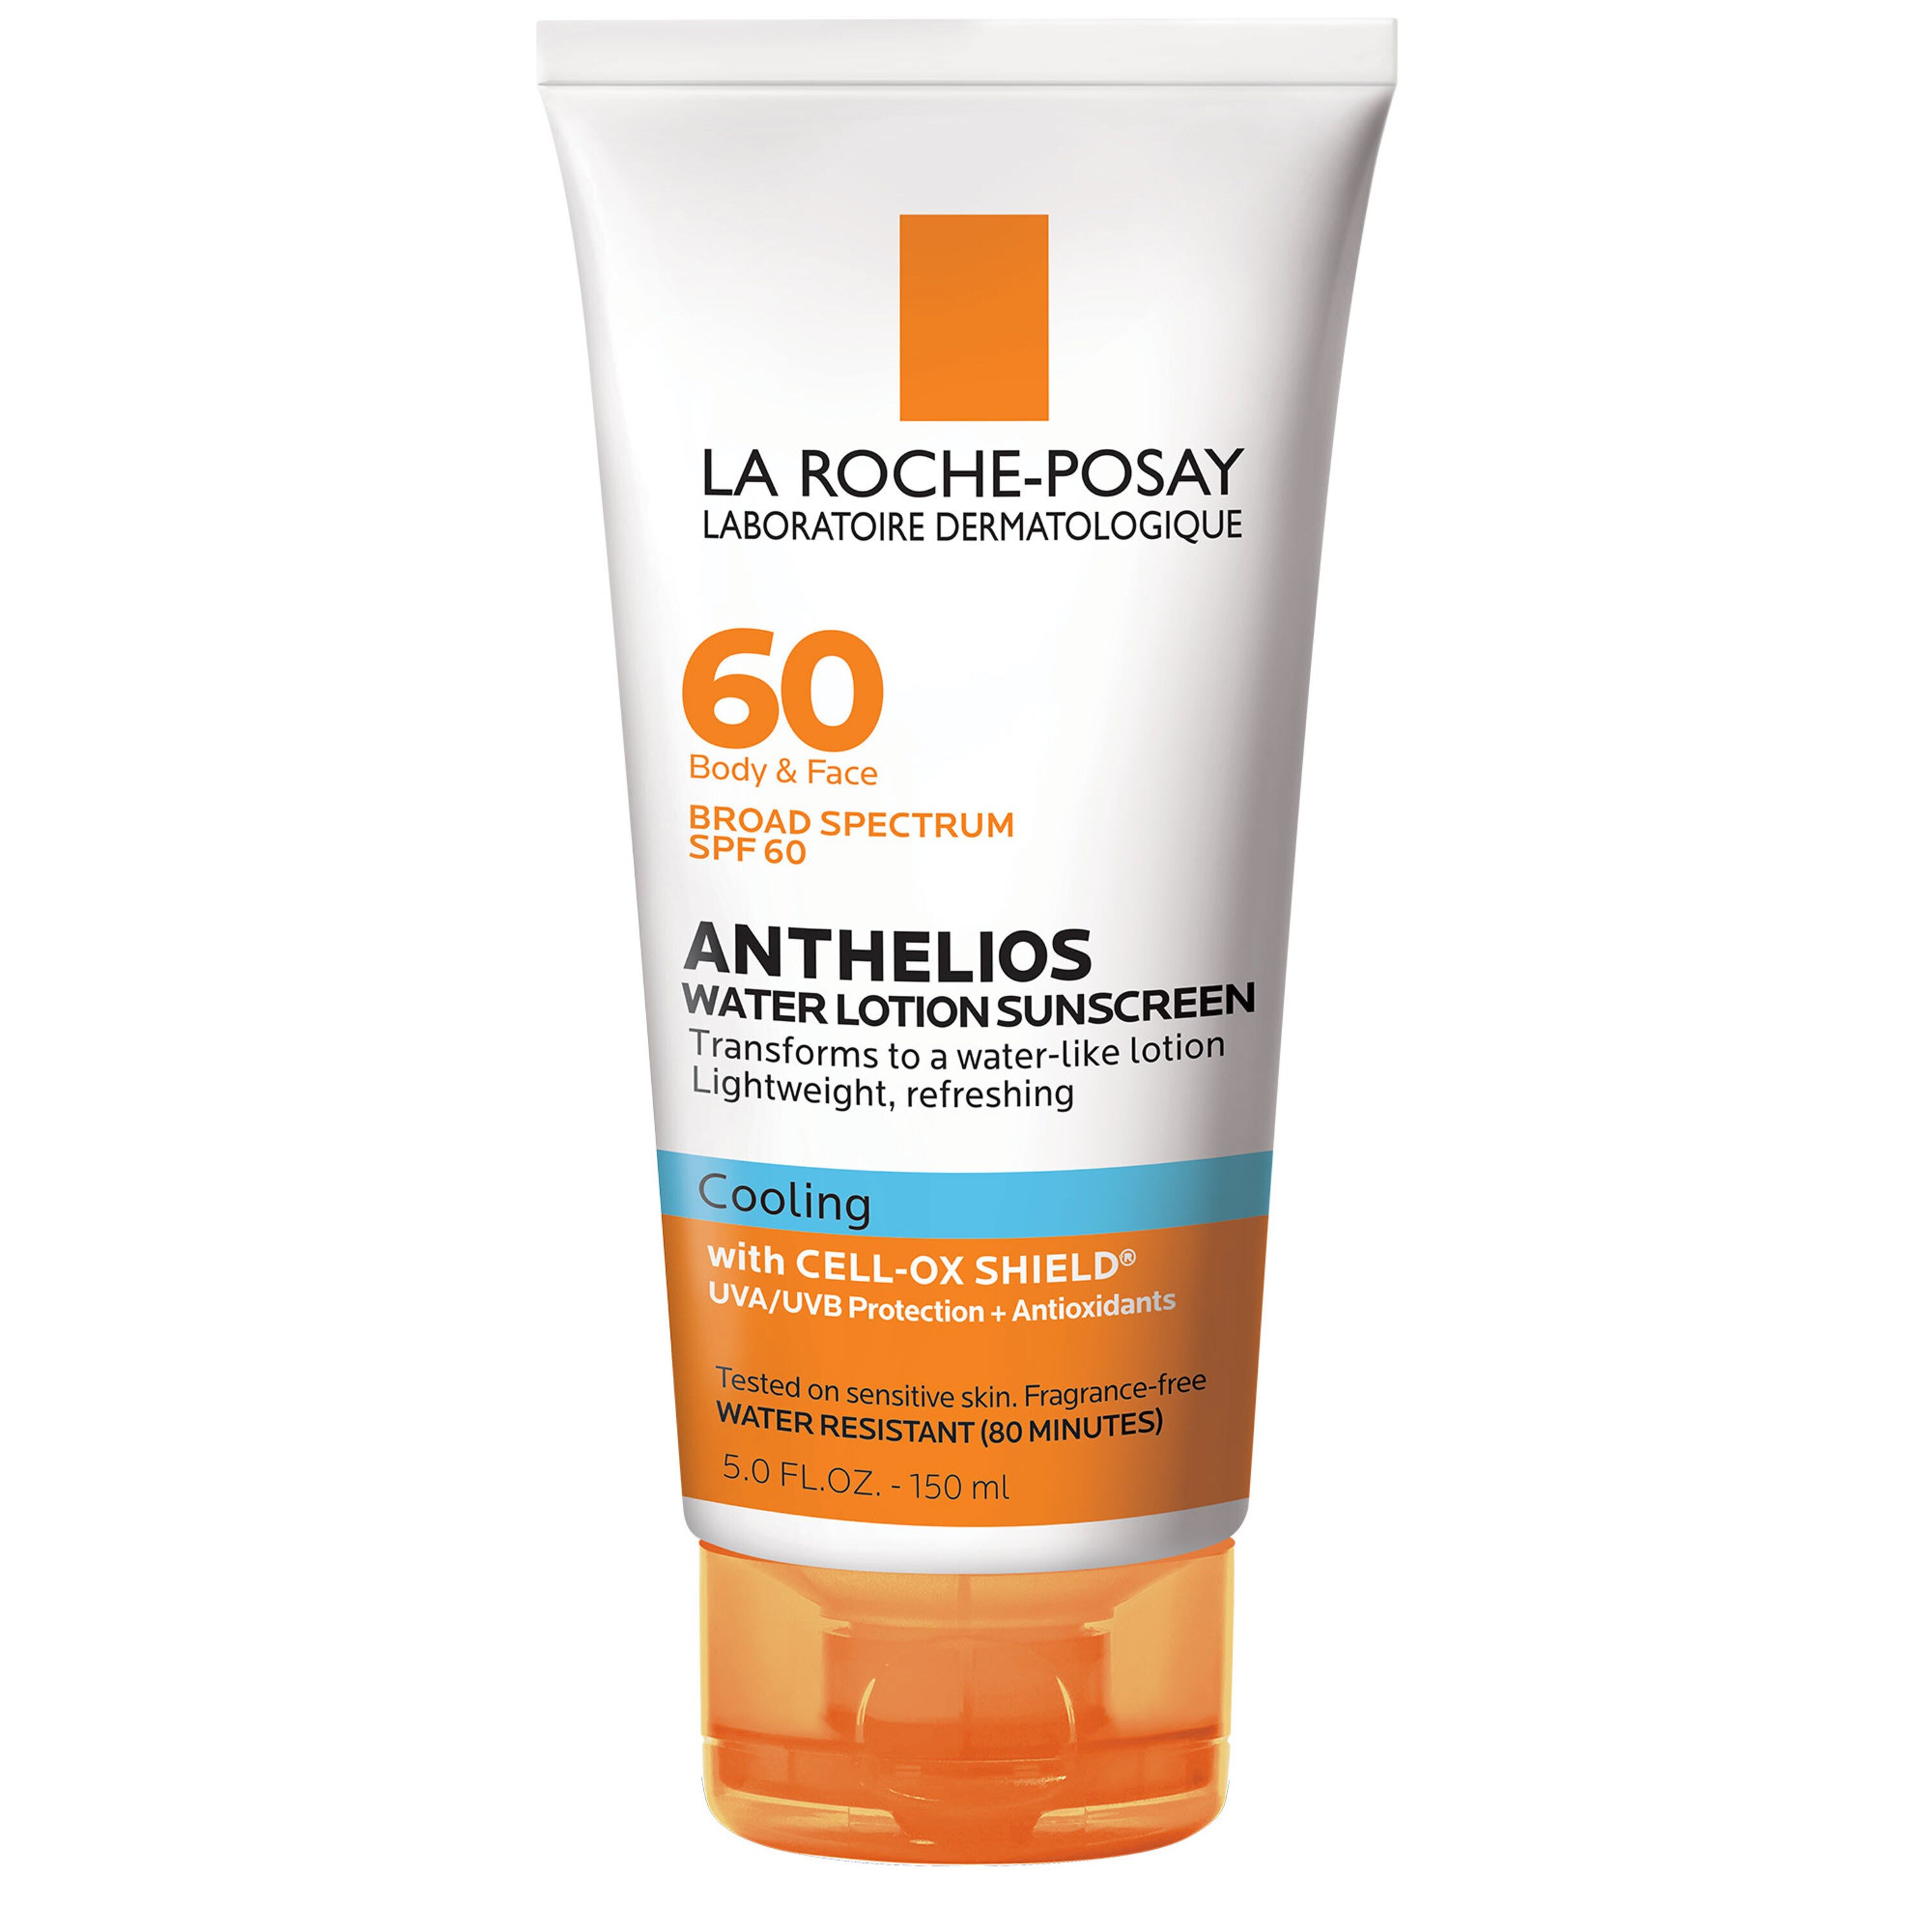 La Roche-Posay Anthelios Cooling Water-Lotion Sunscreen, SPF 60